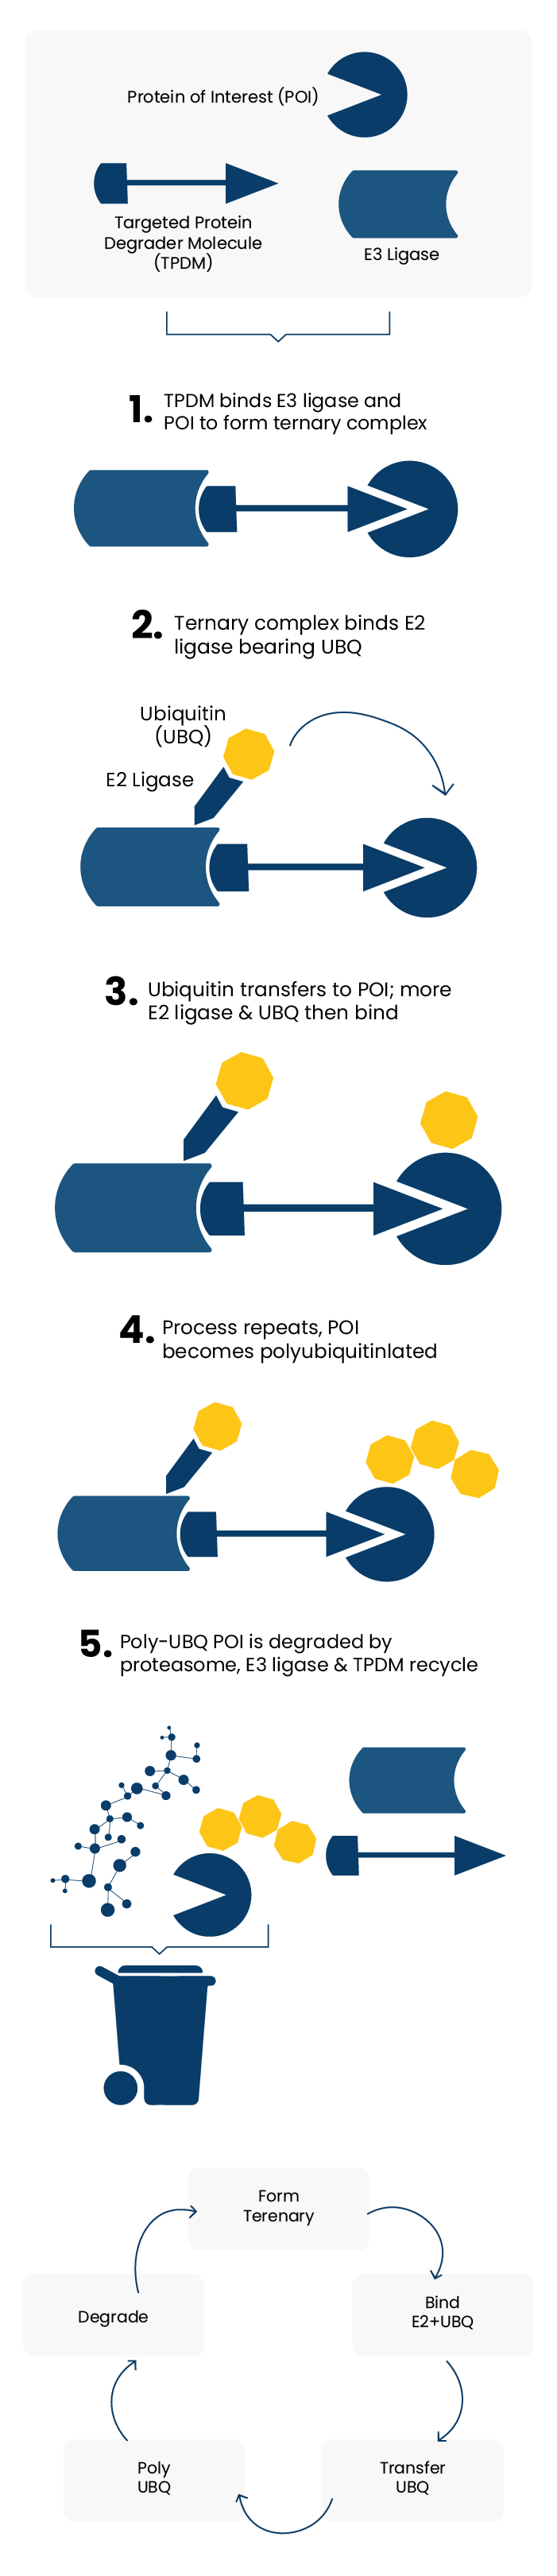 Targeted Protein Degradation (TPD) figure 1